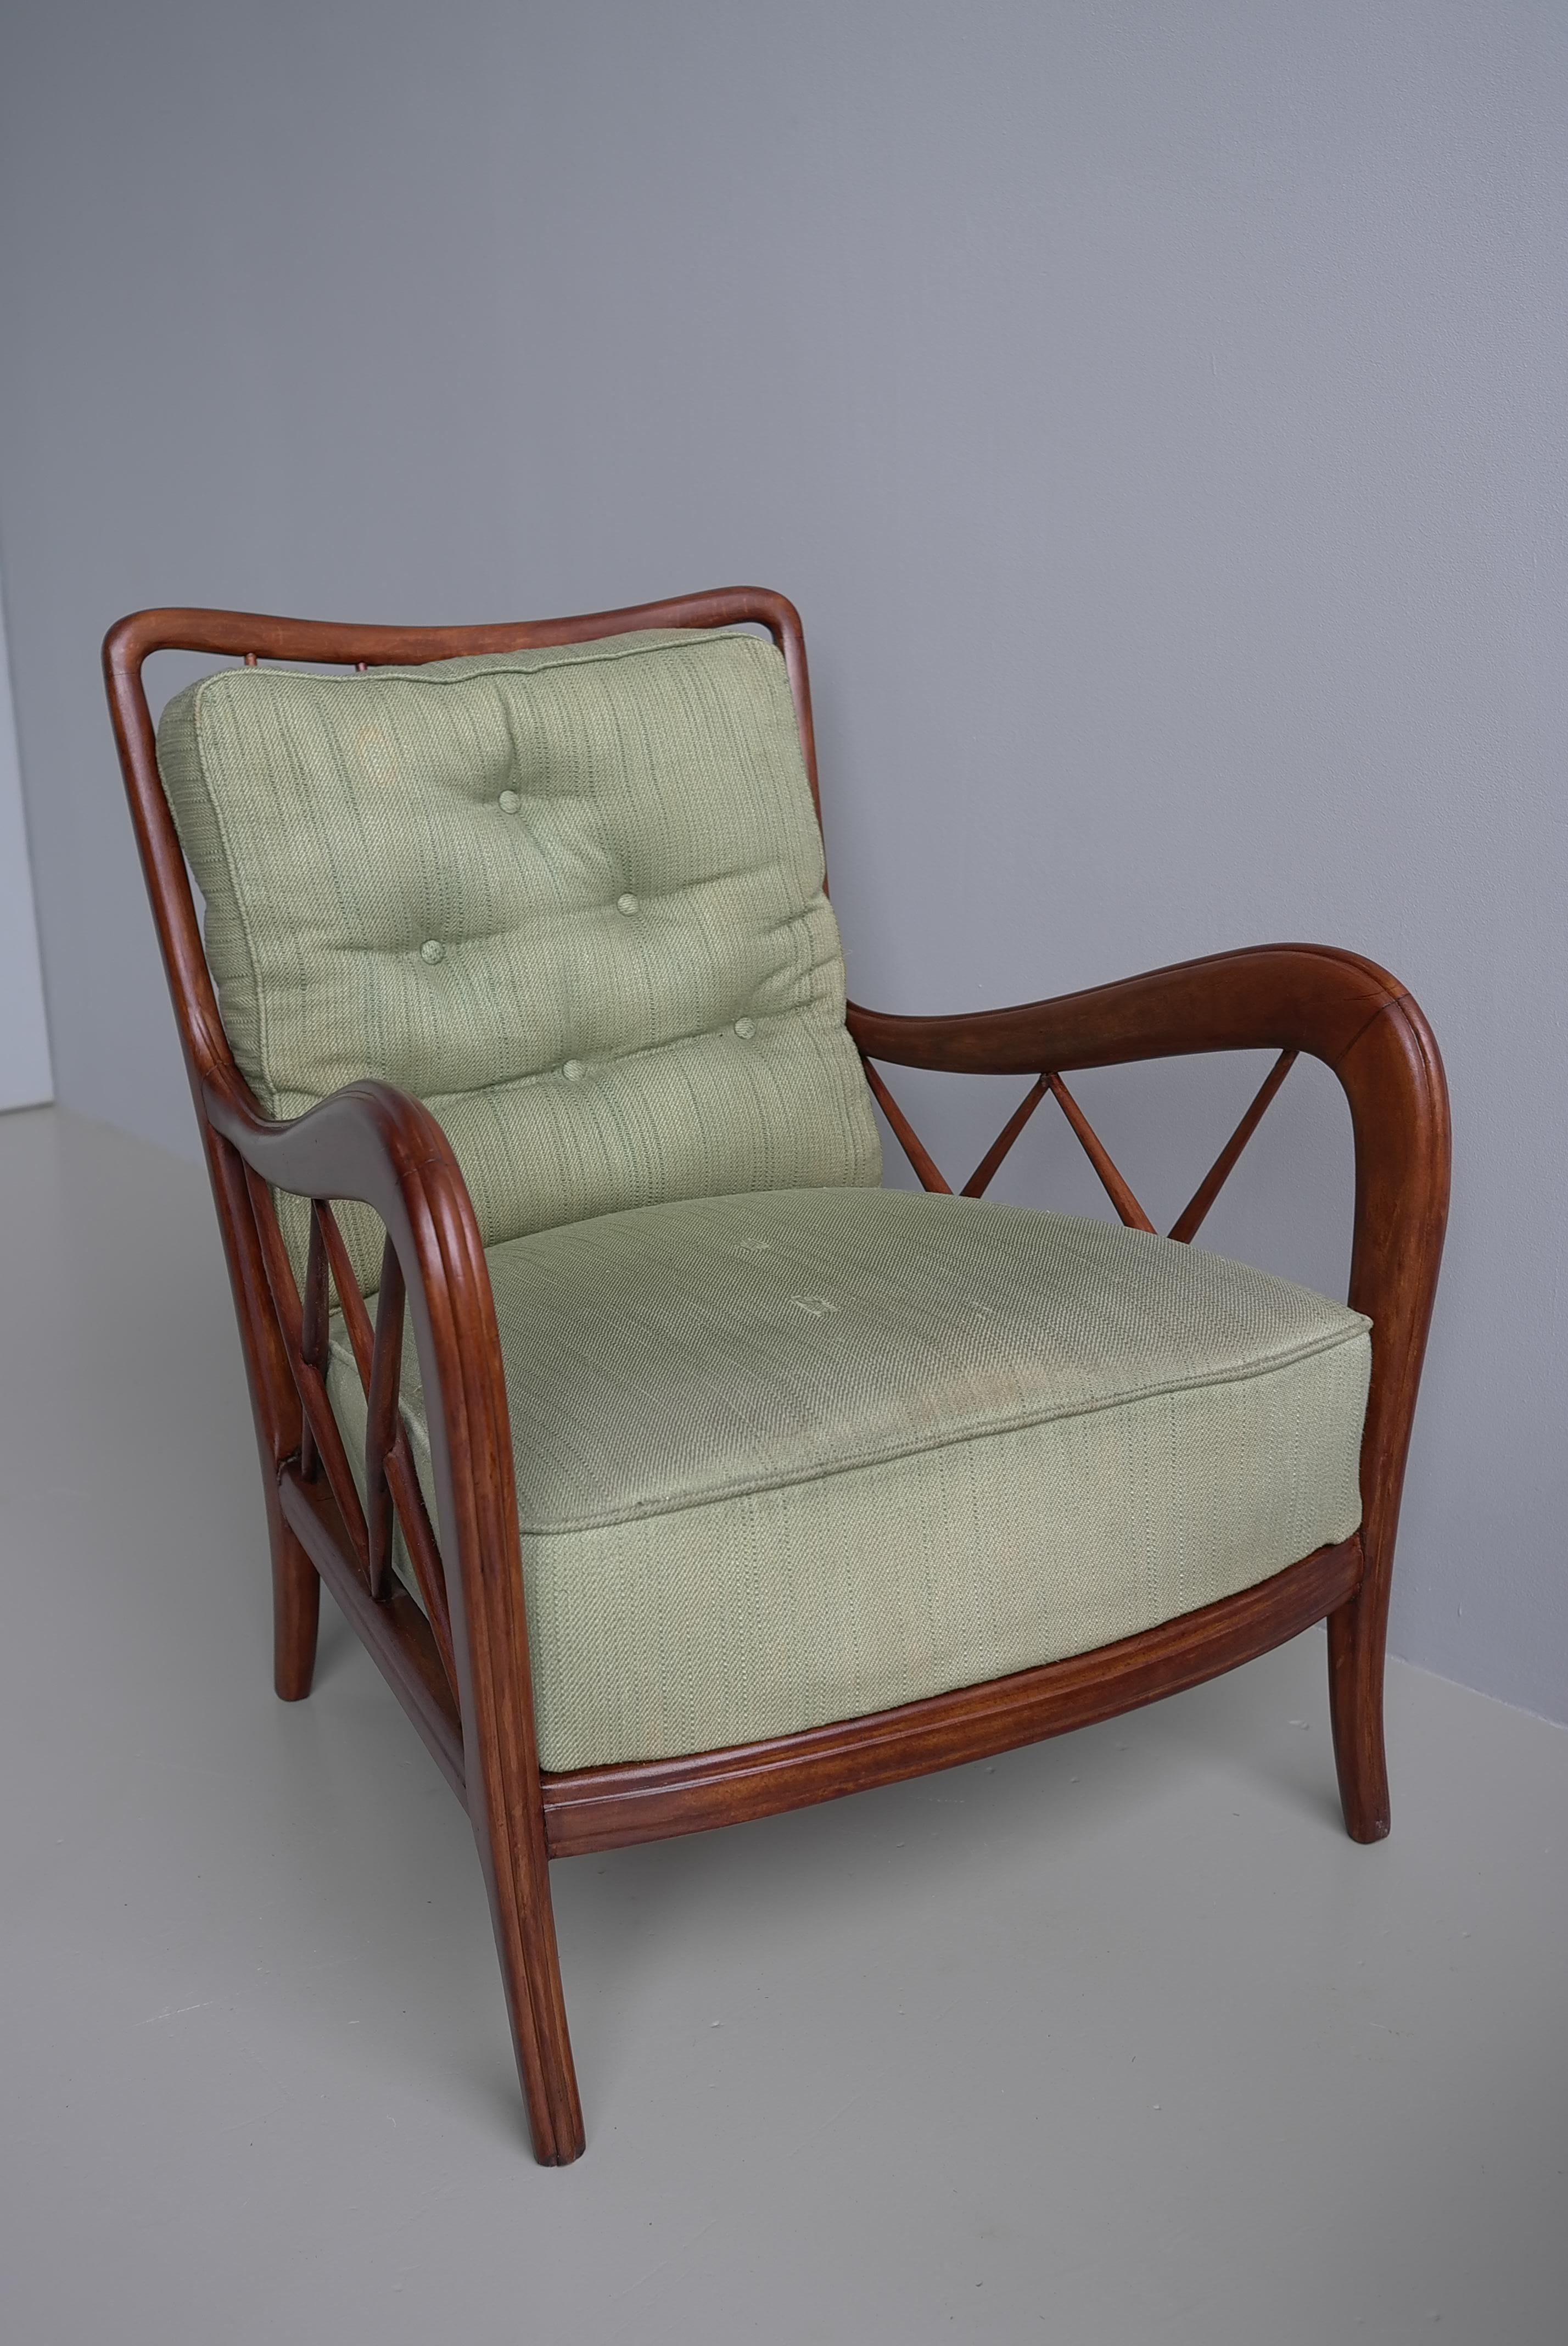 Walnut Wooden Lounge Chairs attr Paolo Buffa, Milan Italy 1940's For Sale 10